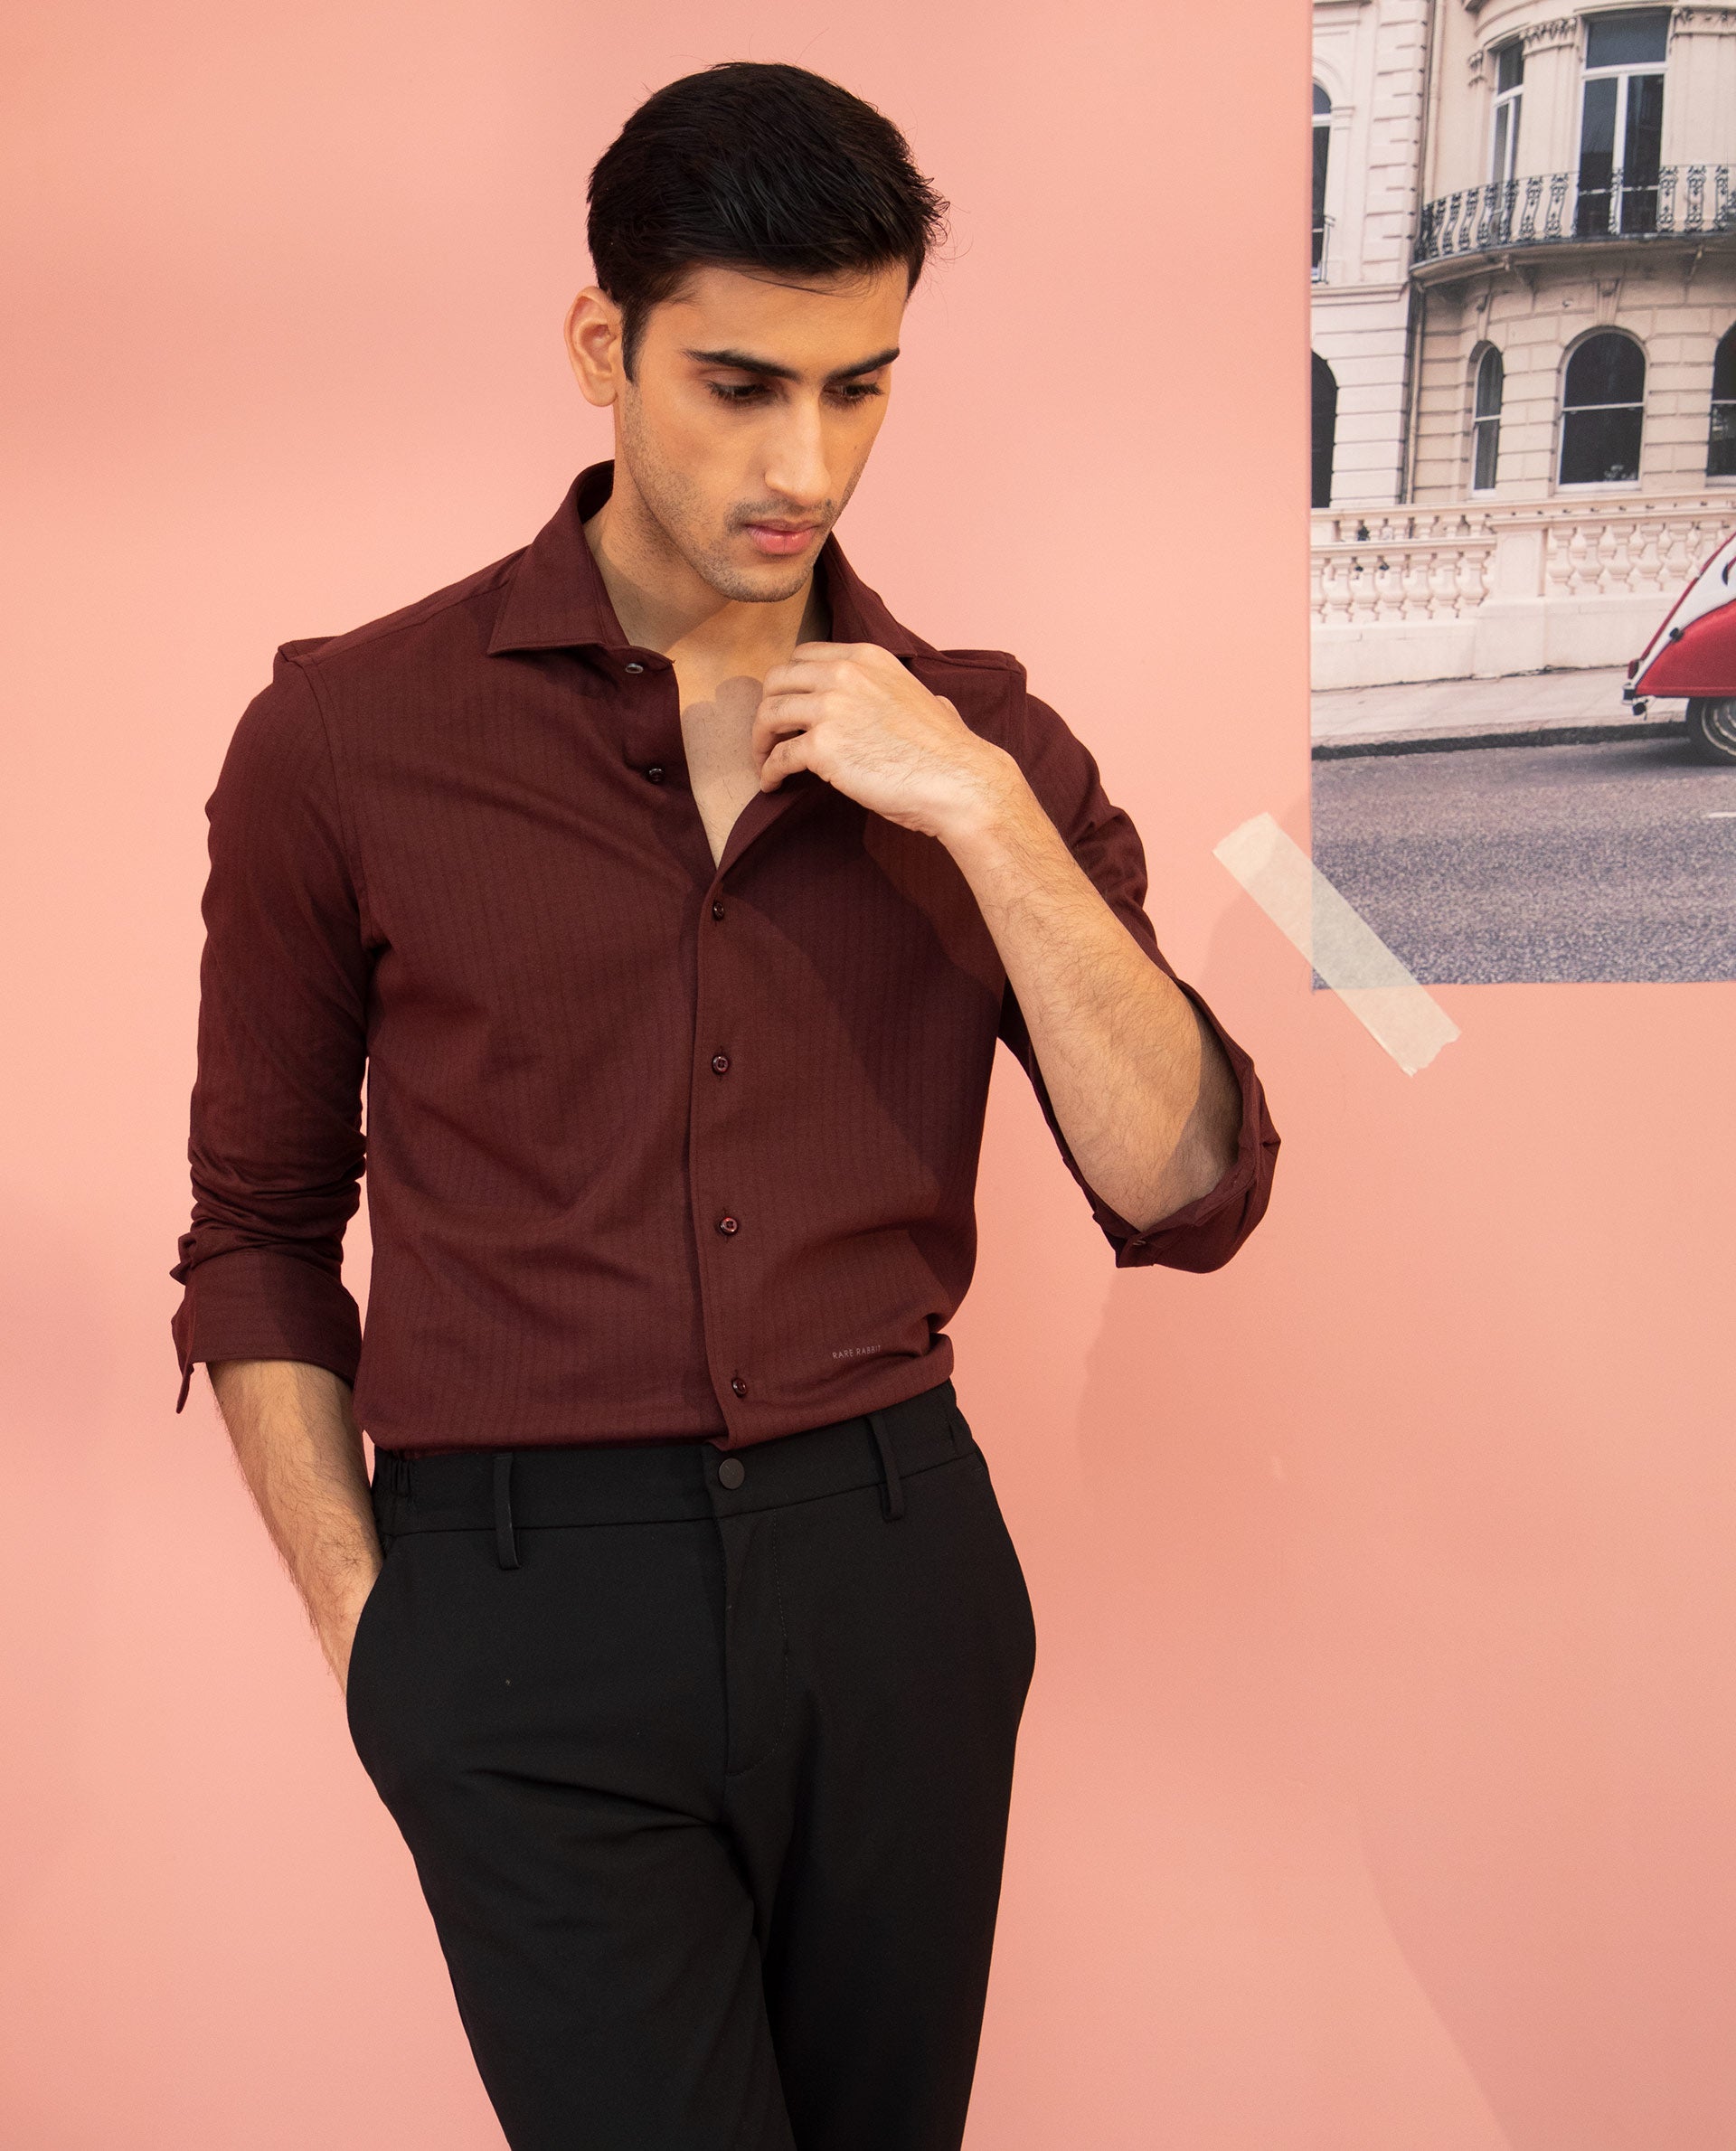 What Color Shirt Goes With Maroon Pants Pics  Ready Sleek